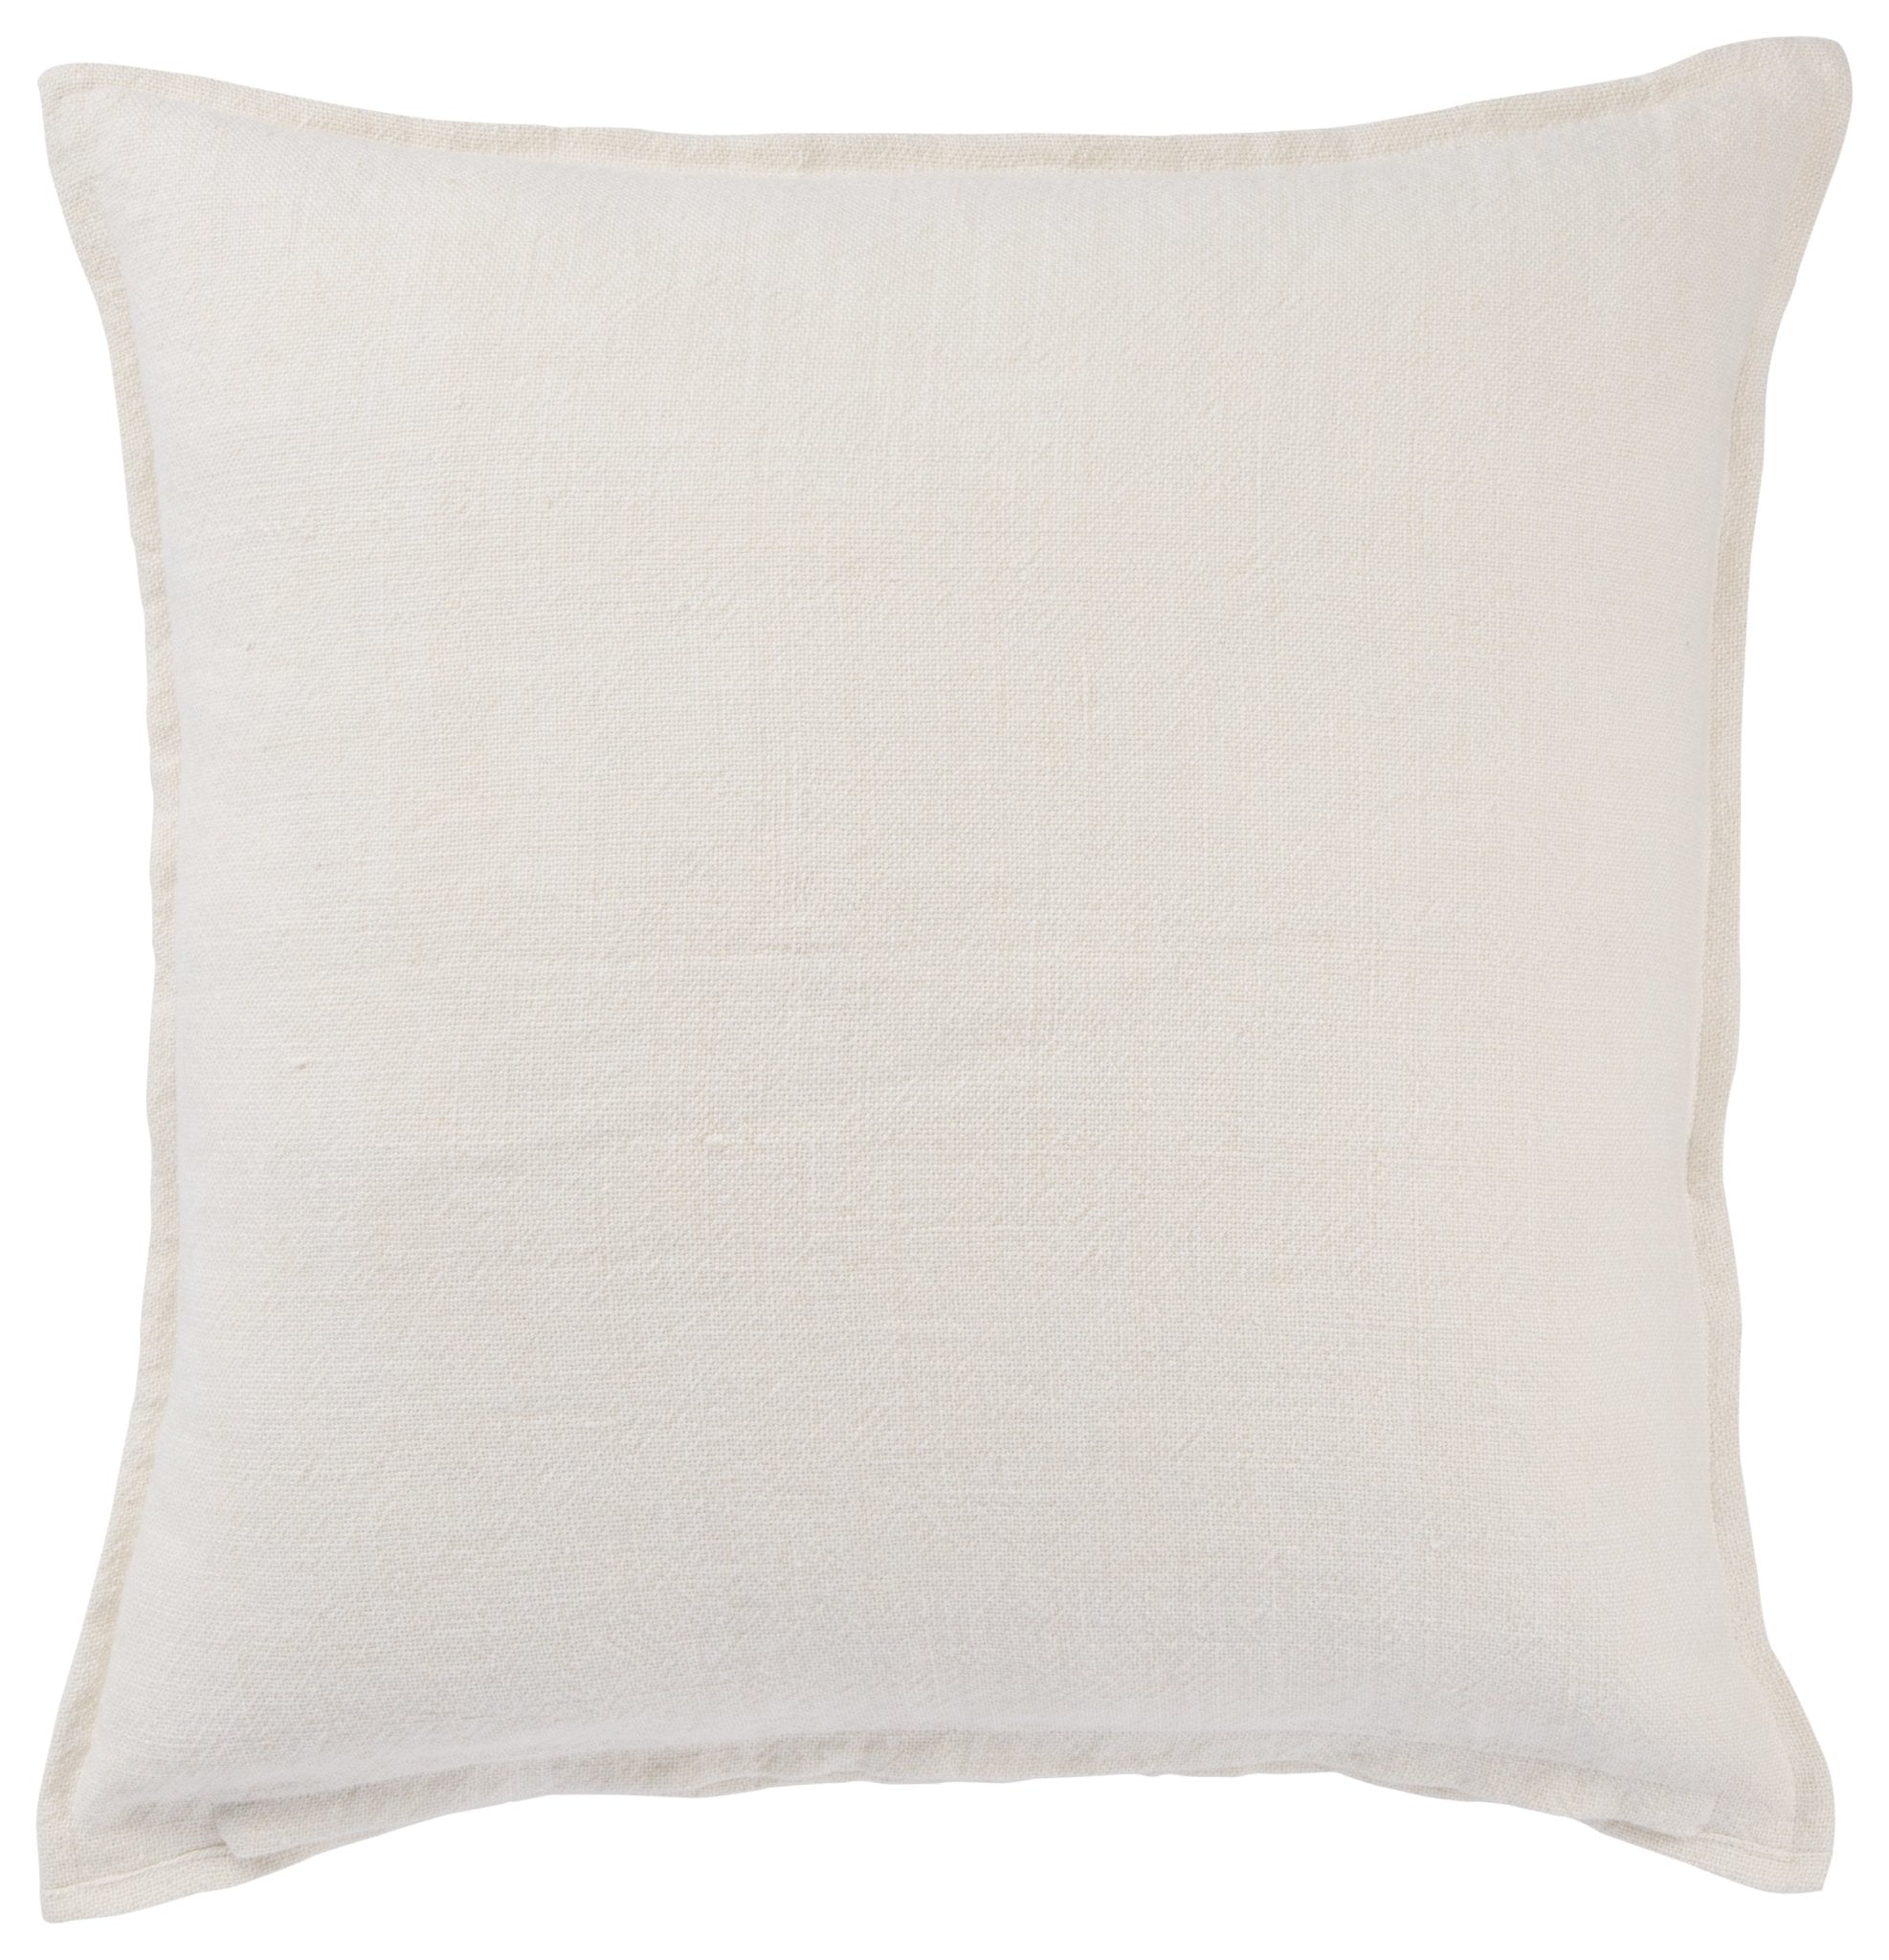 Burbank Brb03 Blanche Ivory Pillow - Rug & Home